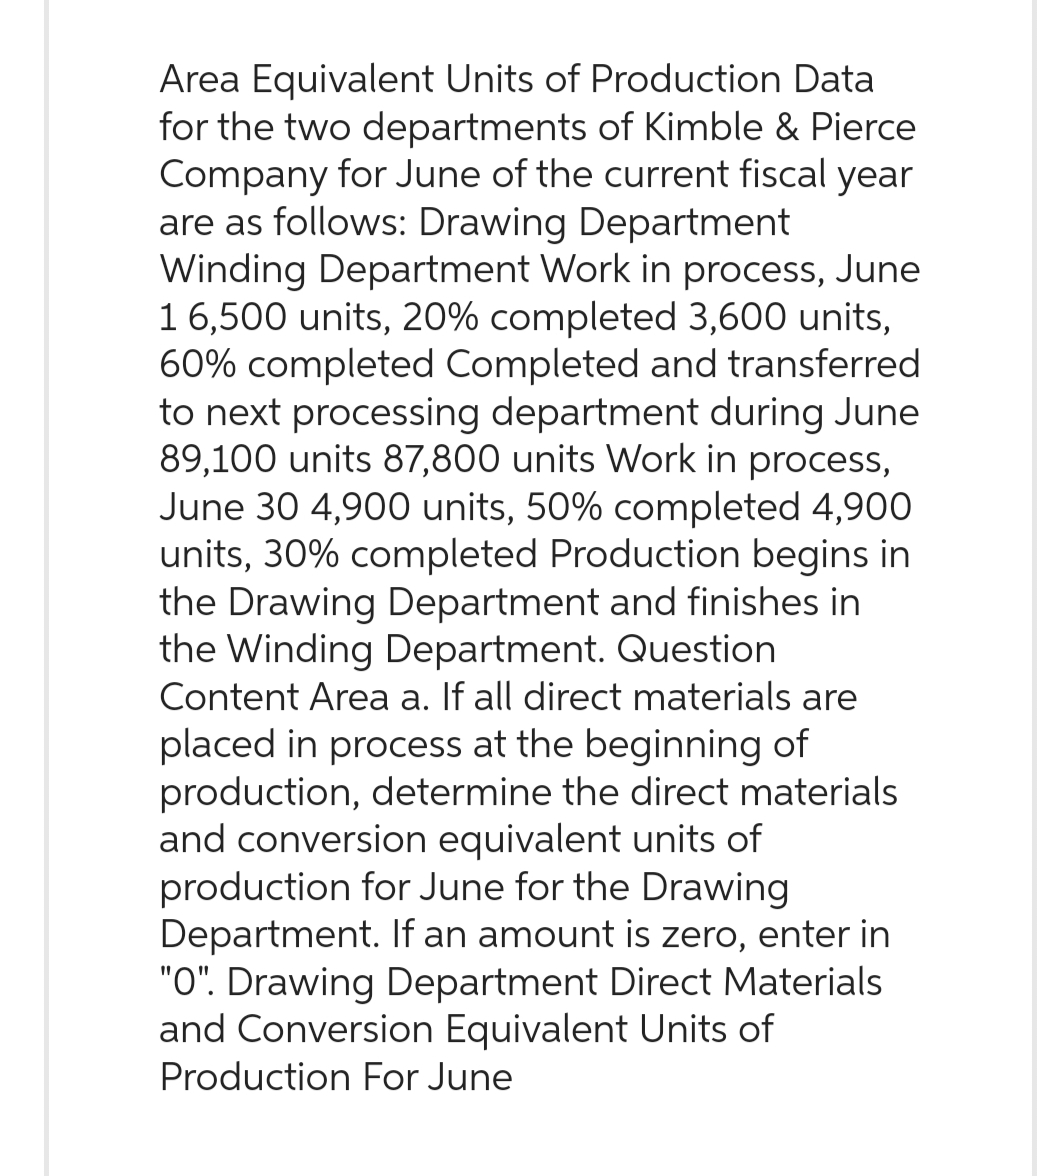 Area Equivalent Units of Production Data
for the two departments of Kimble & Pierce
Company for June of the current fiscal year
are as follows: Drawing Department
Winding Department Work in process, June
1 6,500 units, 20% completed 3,600 units,
60% completed Completed and transferred
to next processing department during June
89,100 units 87,800 units Work in process,
June 30 4,900 units, 50% completed 4,900
units, 30% completed Production begins in
the Drawing Department and finishes in
the Winding Department. Question
Content Area a. If all direct materials are
placed in process at the beginning of
production, determine the direct materials
and conversion equivalent units of
production for June for the Drawing
Department. If an amount is zero, enter in
"O". Drawing Department Direct Materials
and Conversion Equivalent Units of
Production For June